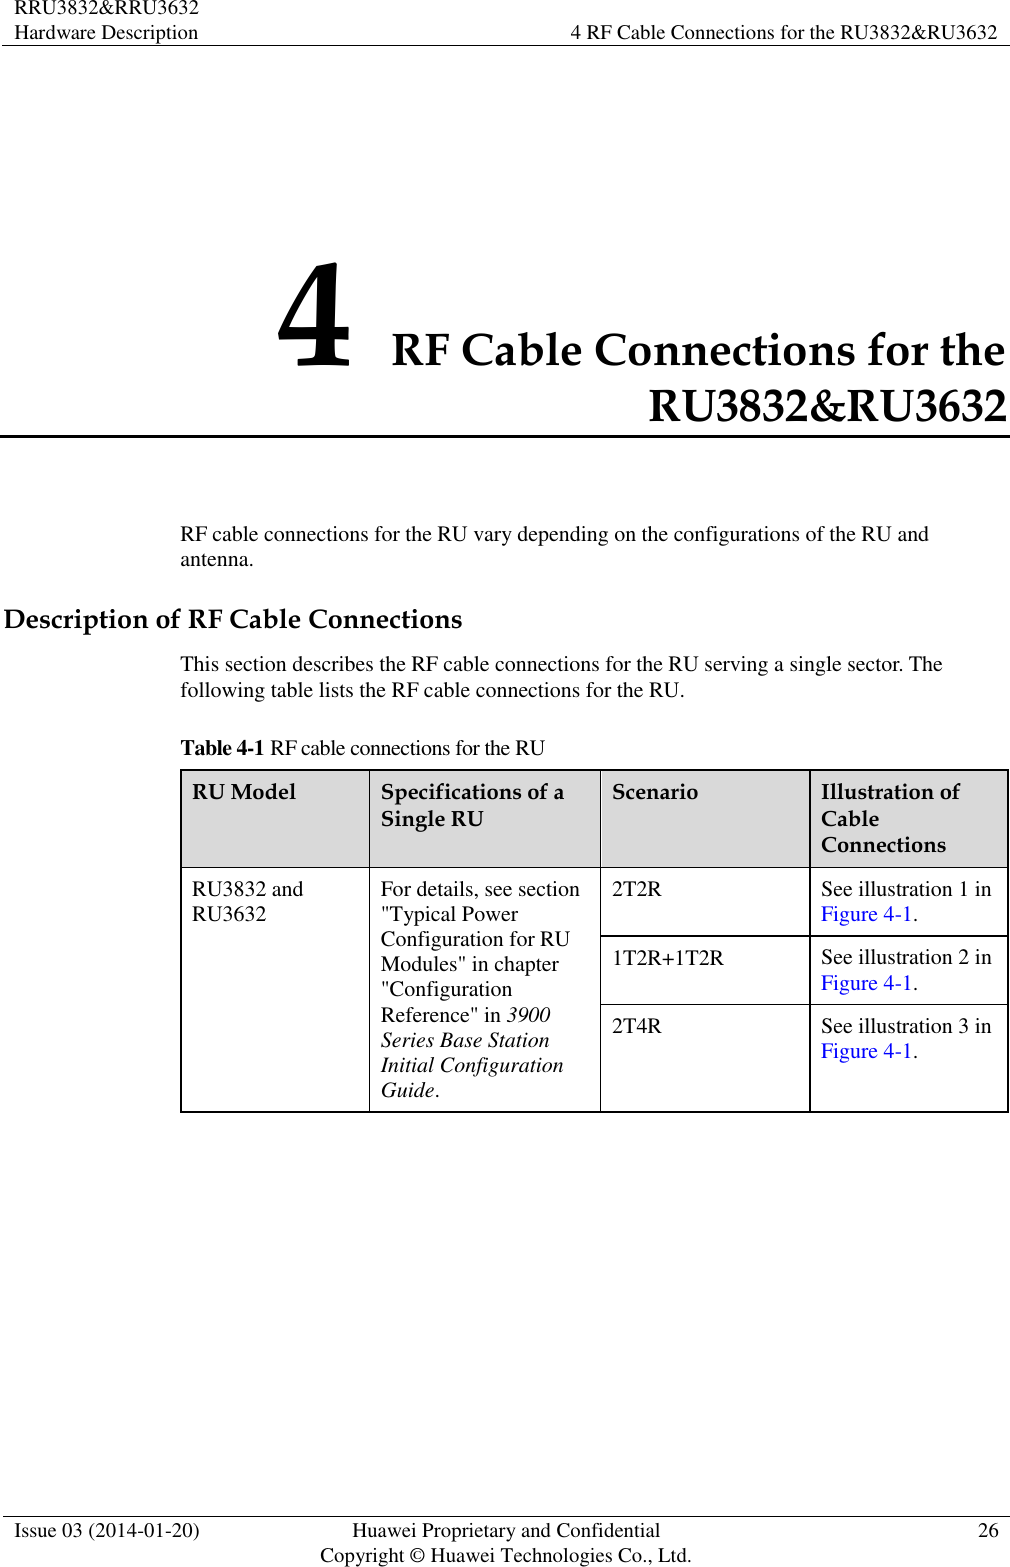 RRU3832&amp;RRU3632 Hardware Description 4 RF Cable Connections for the RU3832&amp;RU3632  Issue 03 (2014-01-20) Huawei Proprietary and Confidential                                     Copyright © Huawei Technologies Co., Ltd. 26  4 RF Cable Connections for the RU3832&amp;RU3632 RF cable connections for the RU vary depending on the configurations of the RU and antenna. Description of RF Cable Connections This section describes the RF cable connections for the RU serving a single sector. The following table lists the RF cable connections for the RU. Table 4-1 RF cable connections for the RU RU Model Specifications of a Single RU Scenario Illustration of Cable Connections RU3832 and RU3632 For details, see section &quot;Typical Power Configuration for RU Modules&quot; in chapter &quot;Configuration Reference&quot; in 3900 Series Base Station Initial Configuration Guide. 2T2R See illustration 1 in Figure 4-1. 1T2R+1T2R See illustration 2 in Figure 4-1. 2T4R See illustration 3 in Figure 4-1.  